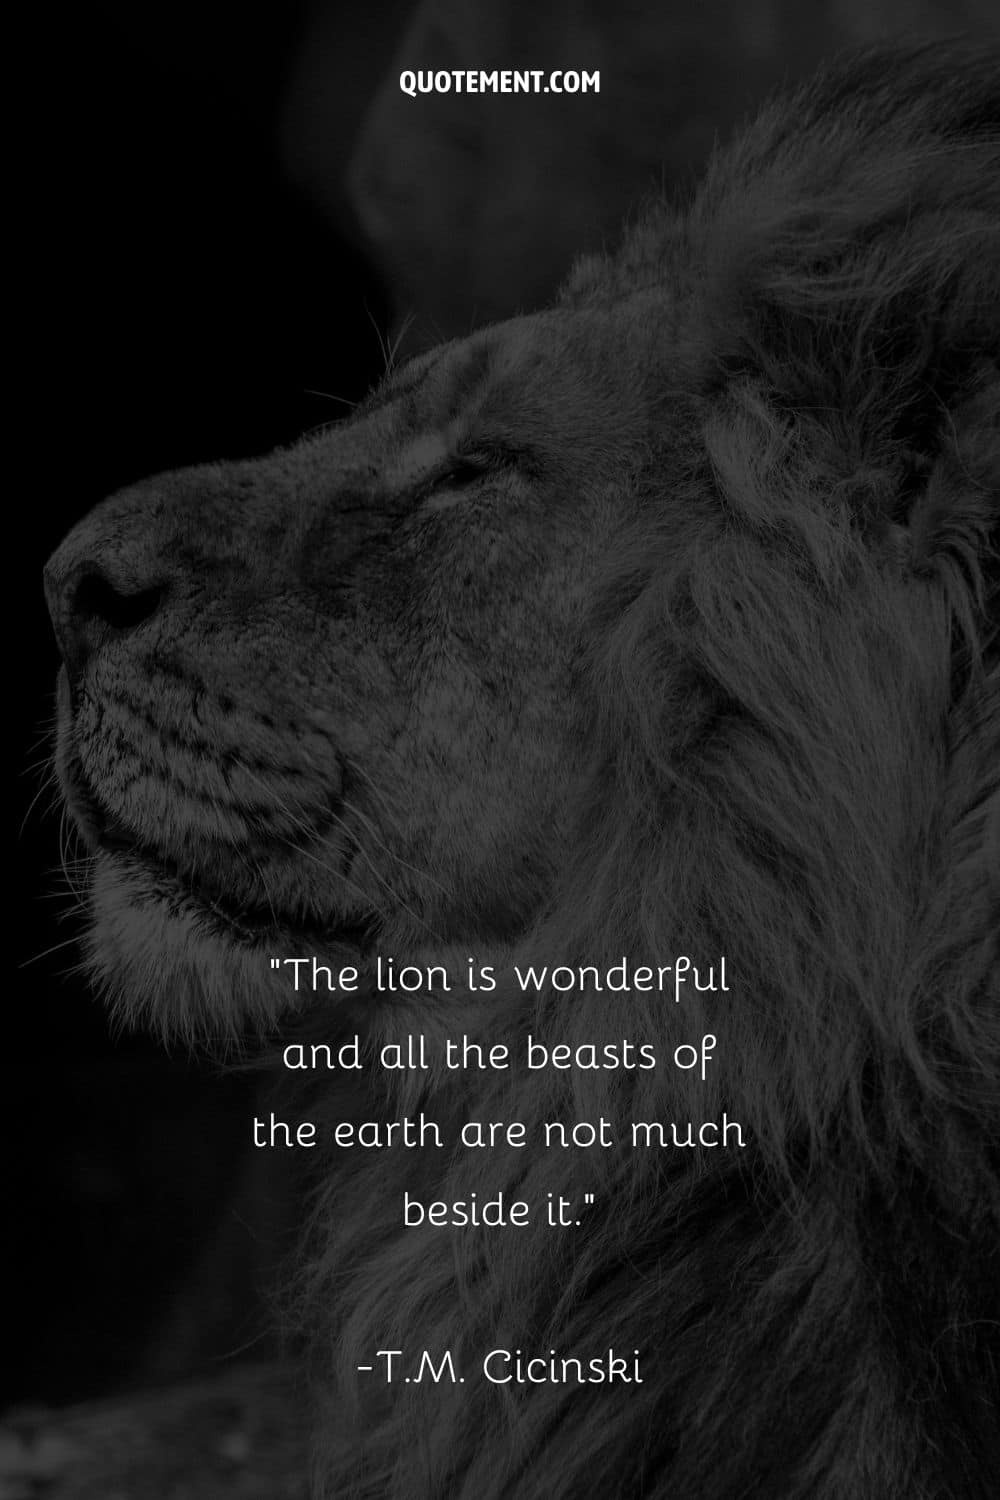 The lion is wonderful and all the beasts of the earth are not much beside it